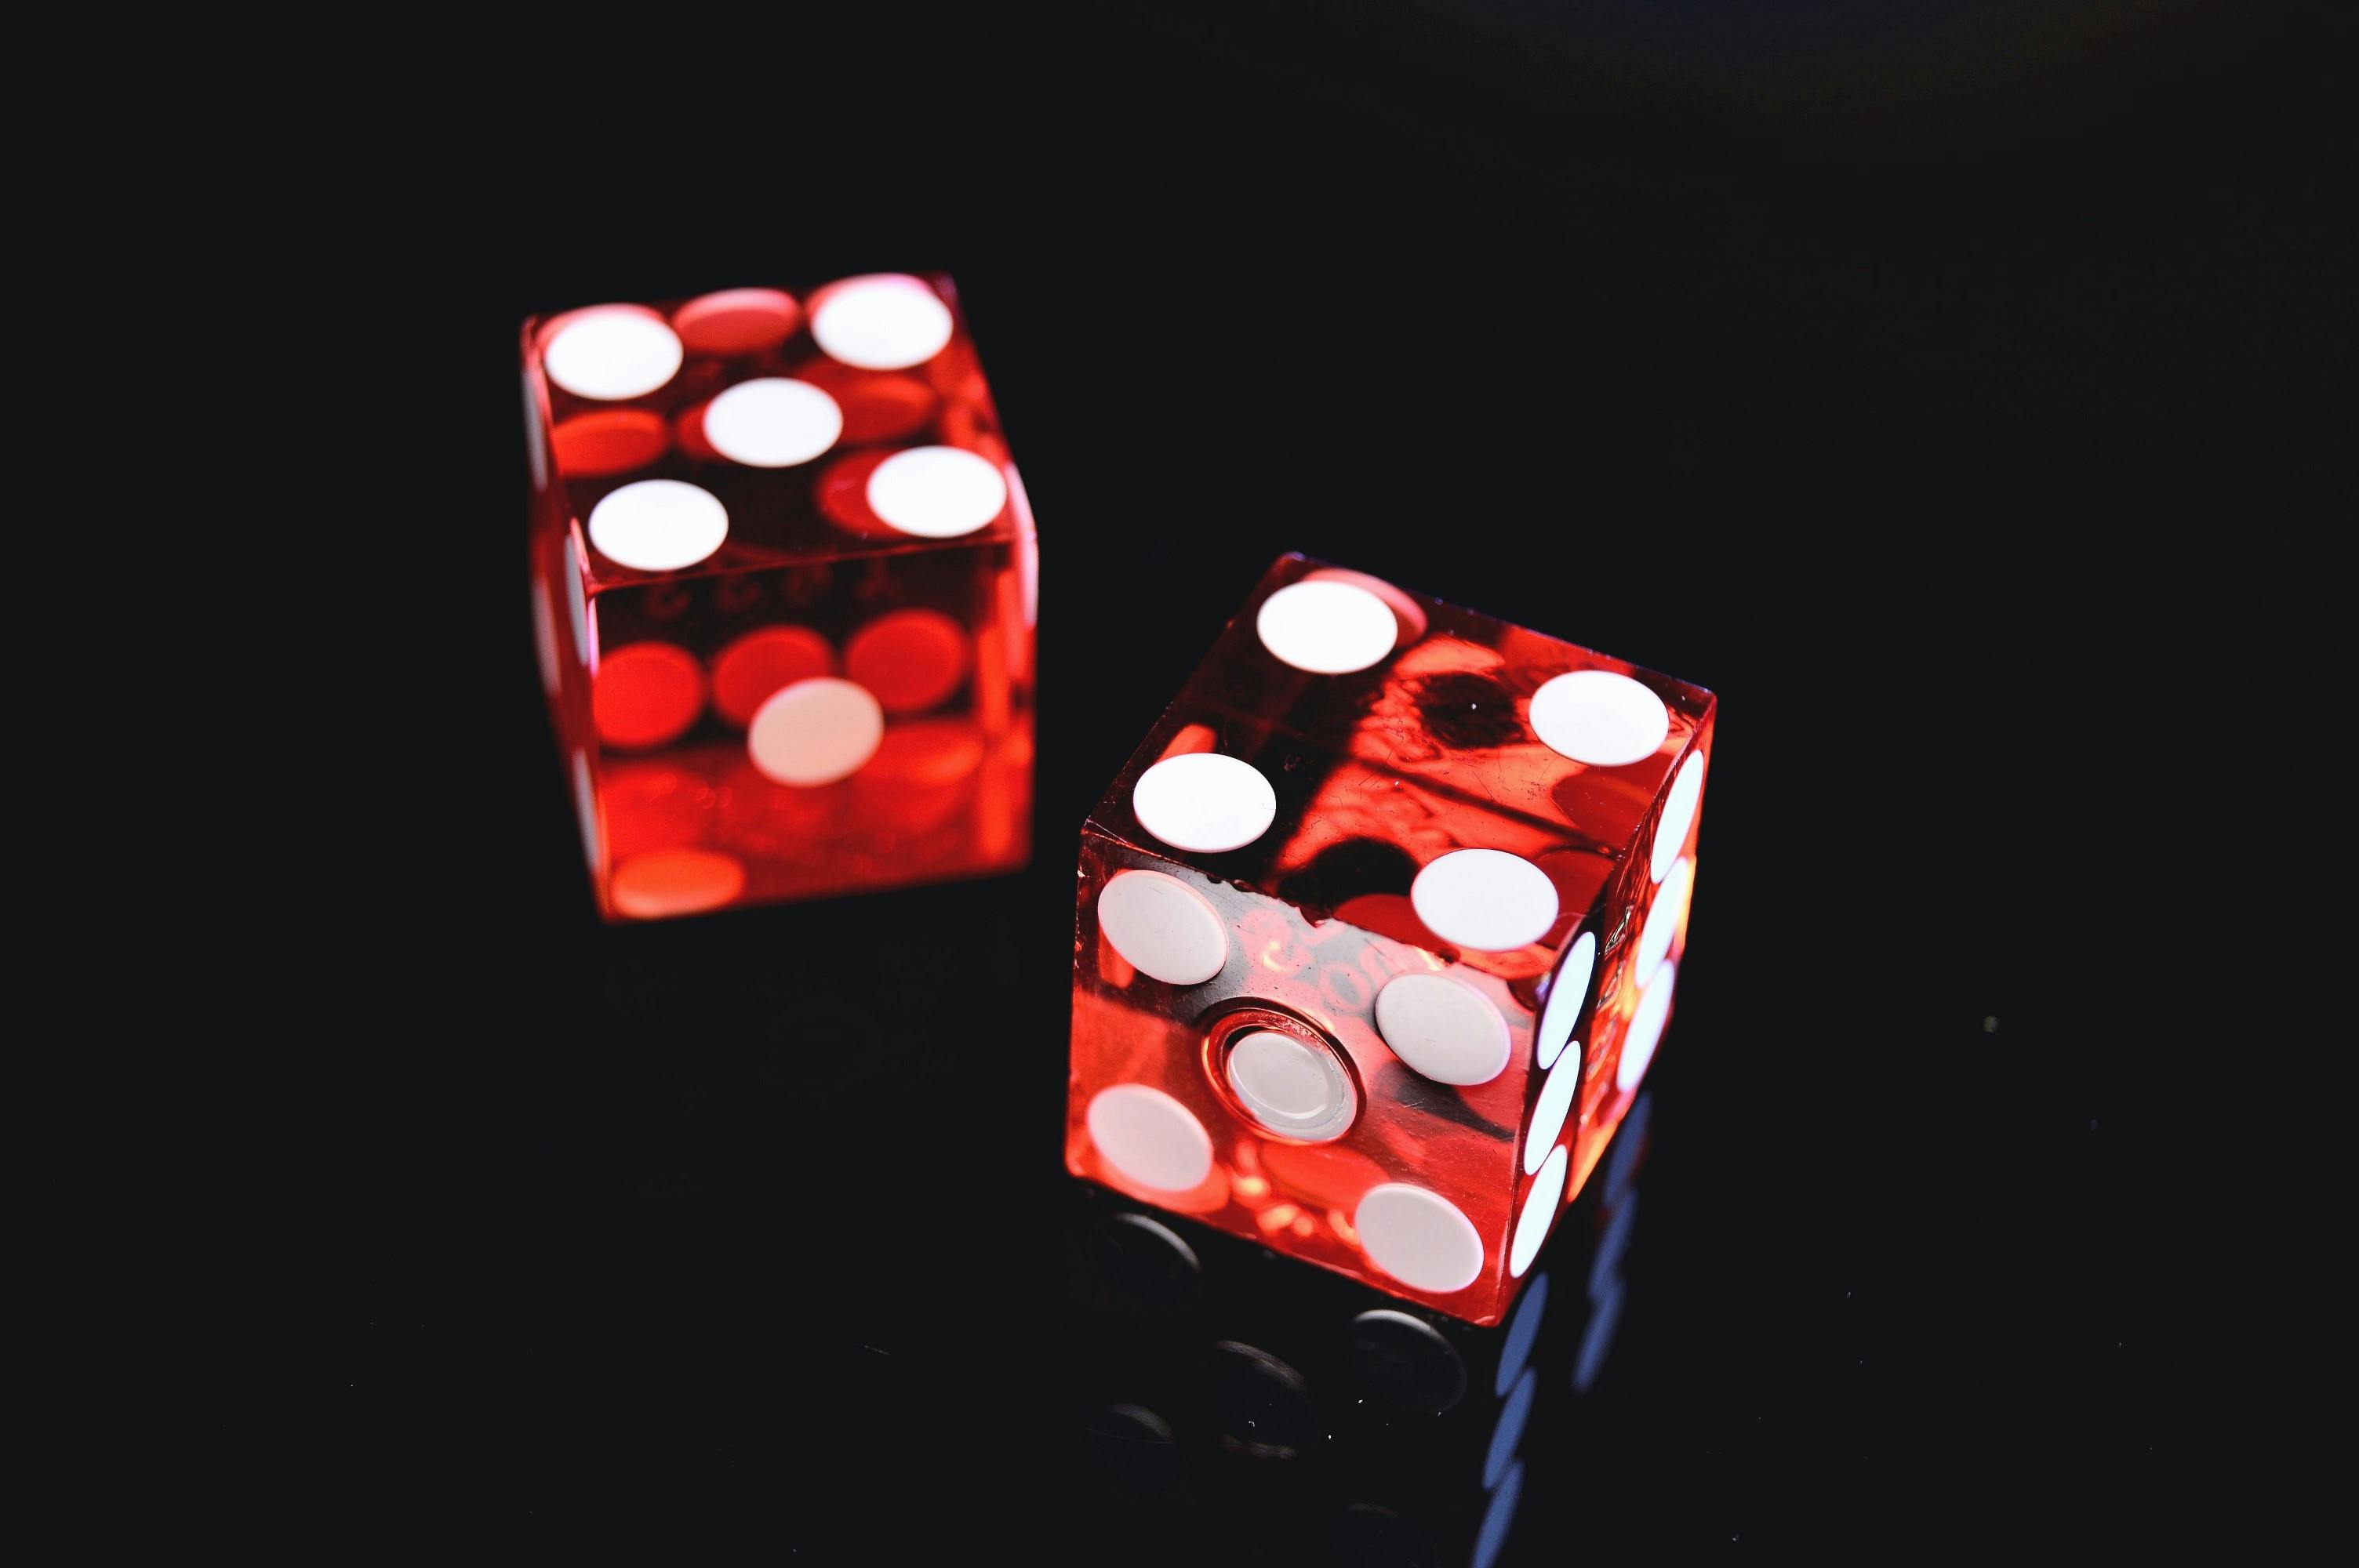 closeup photo of two red dices showing